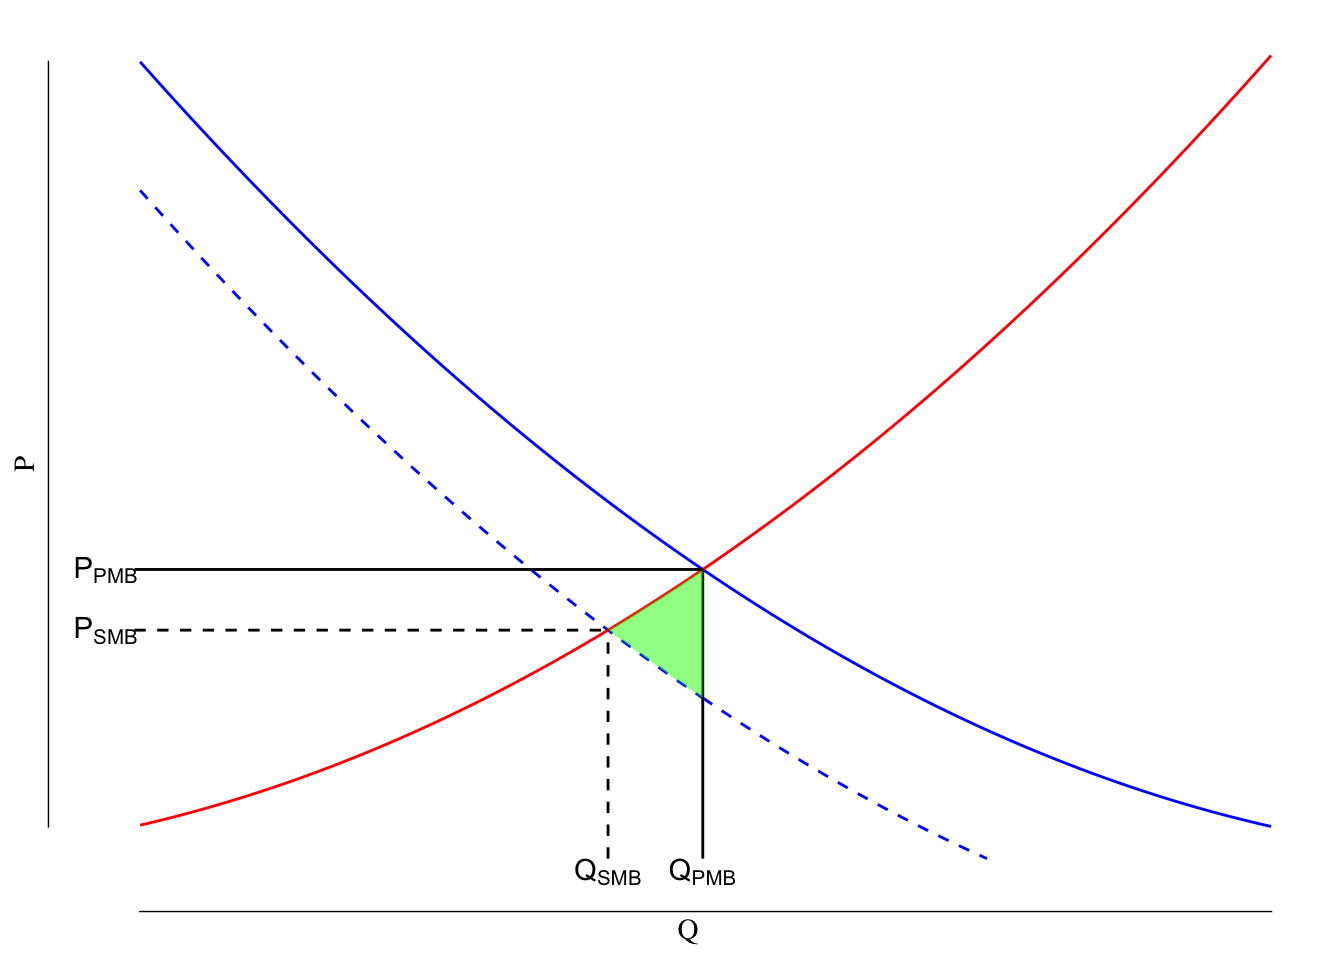 Example of a Negative Consumption Externality. The solid red line is the supply curve, the blue lines reflect demand with the solid blue line being the private marginal benefit (PMB) and the dashed blue line being the societial marginal benefit (SMB). The shaded green area is the deadweight loss associated with the negative consumption externality.